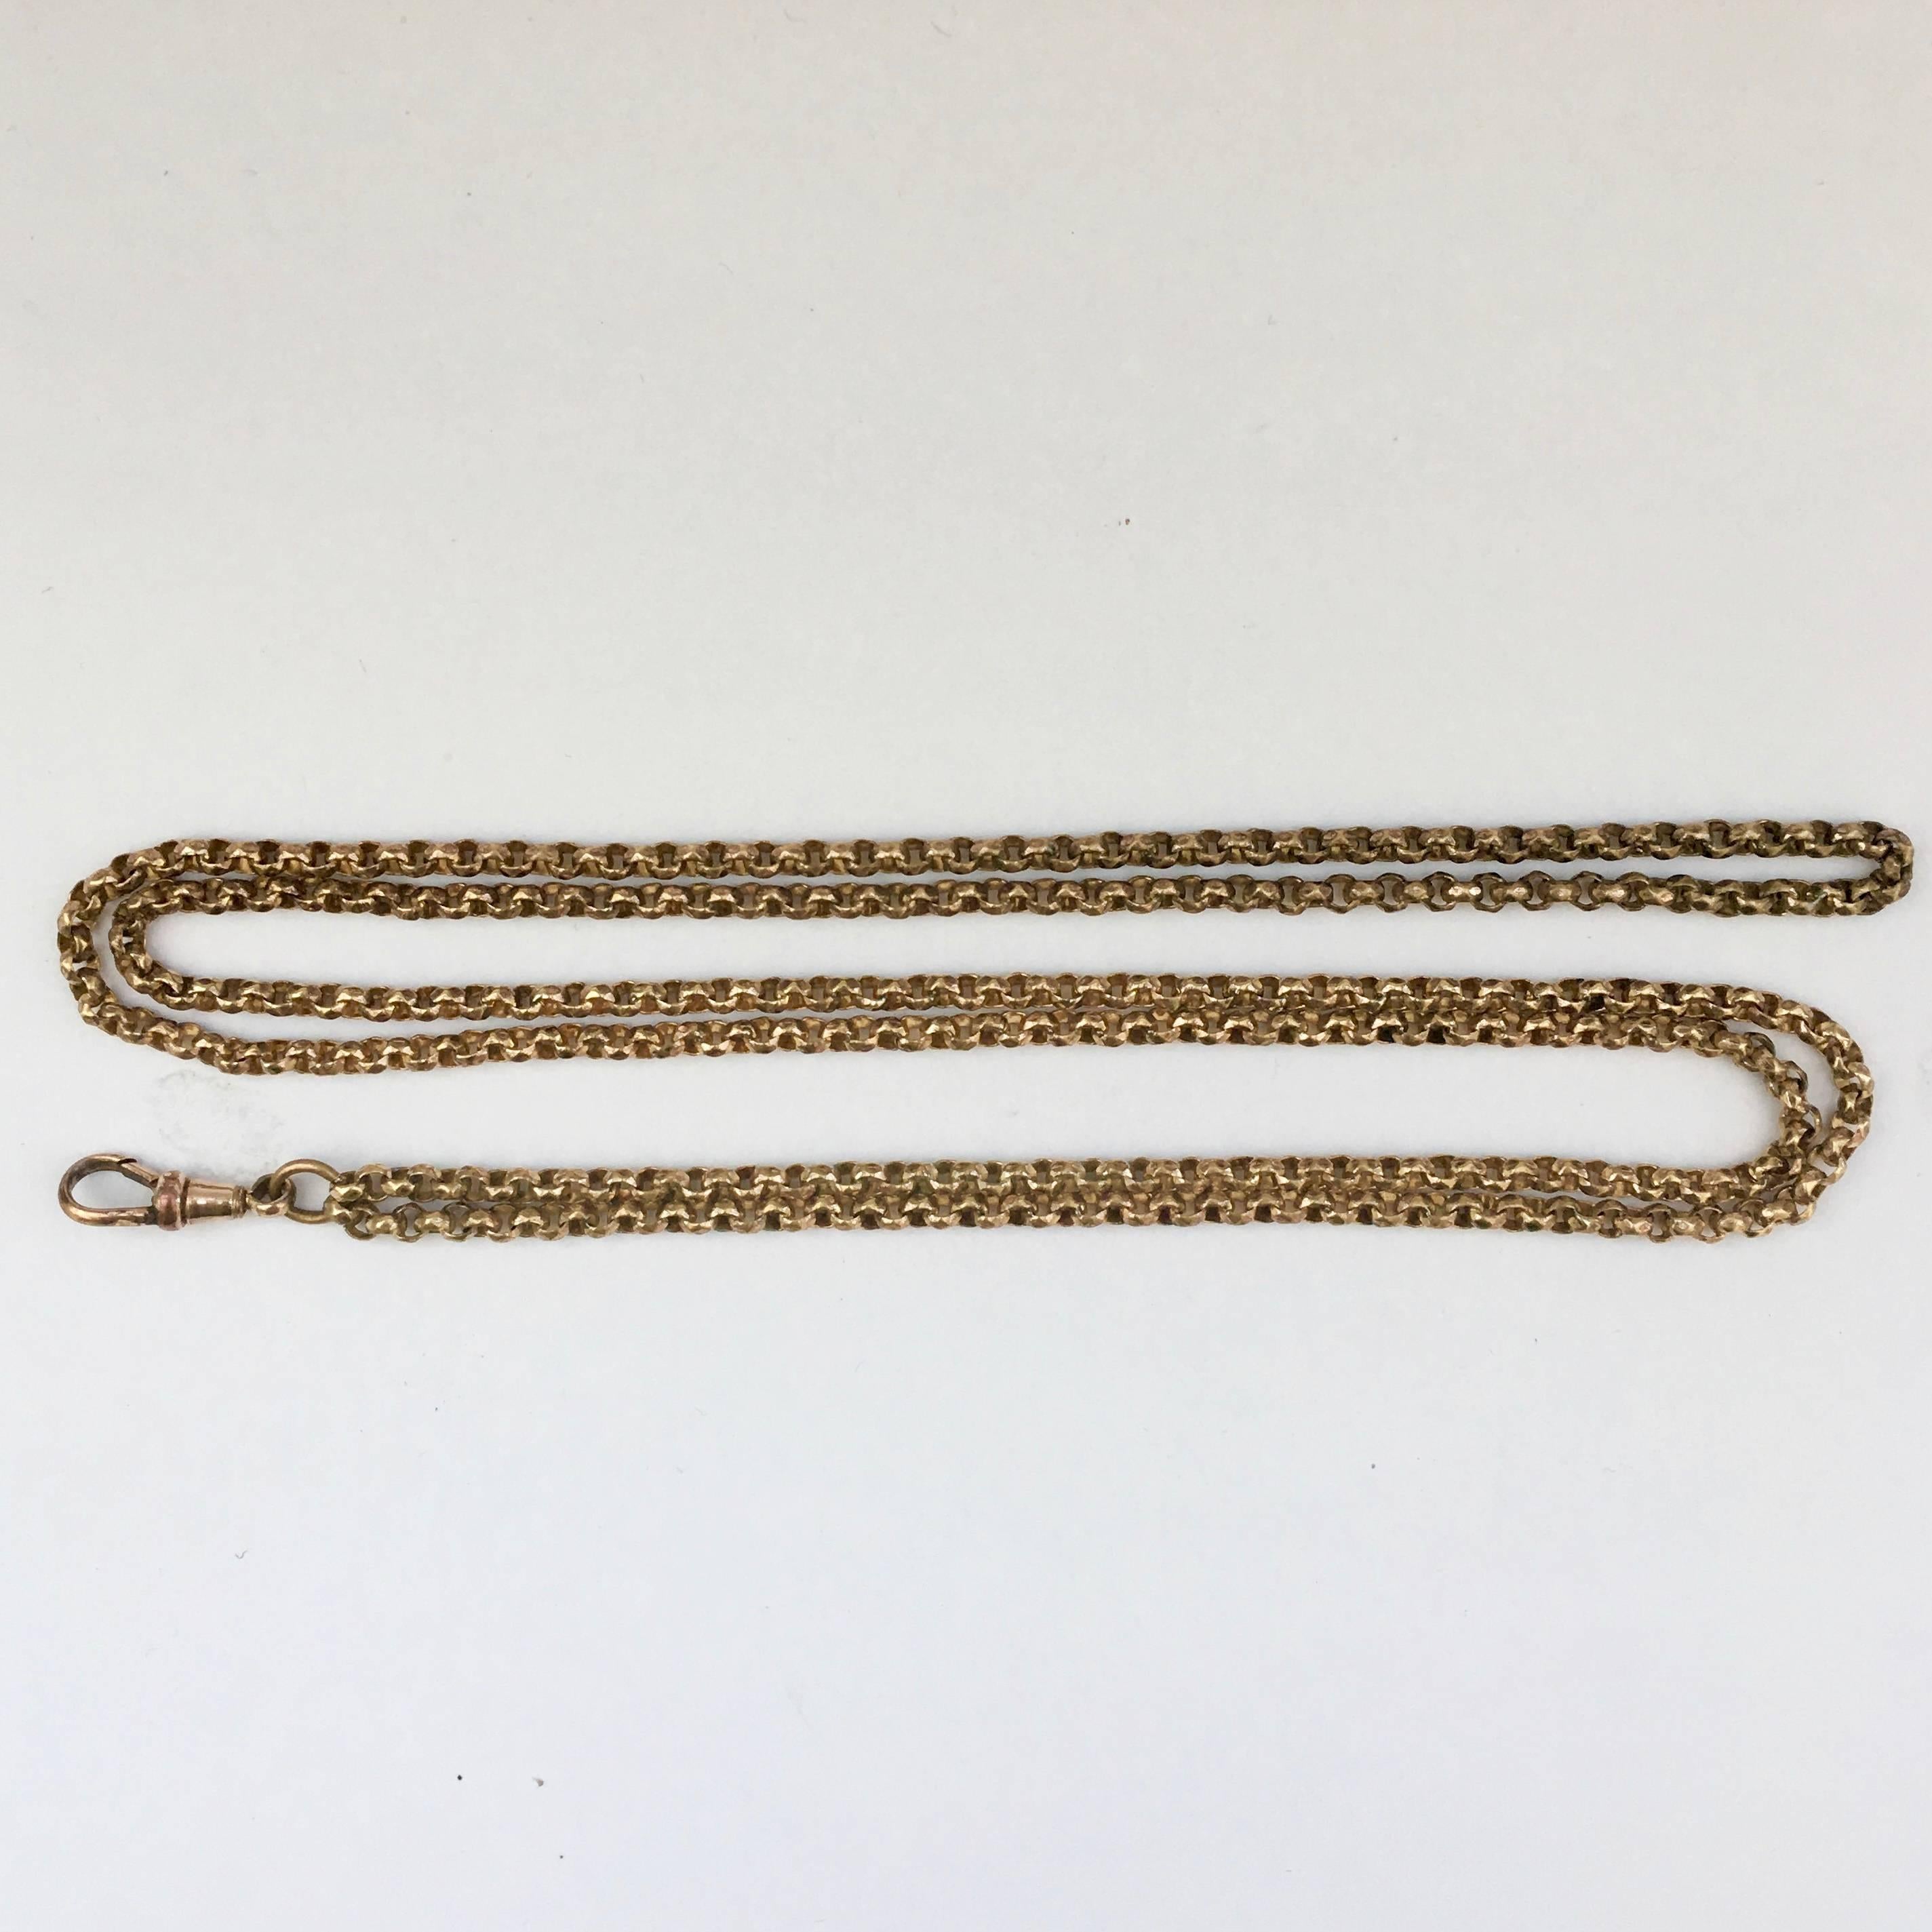 The queen of all chains, the longuard chain is both stylish and incredibly useful. This is a lovely long gilt brass example with beautifully faceted, solid moulded links. It can be worn in a multitude of ways and the lobster clasp is handy for